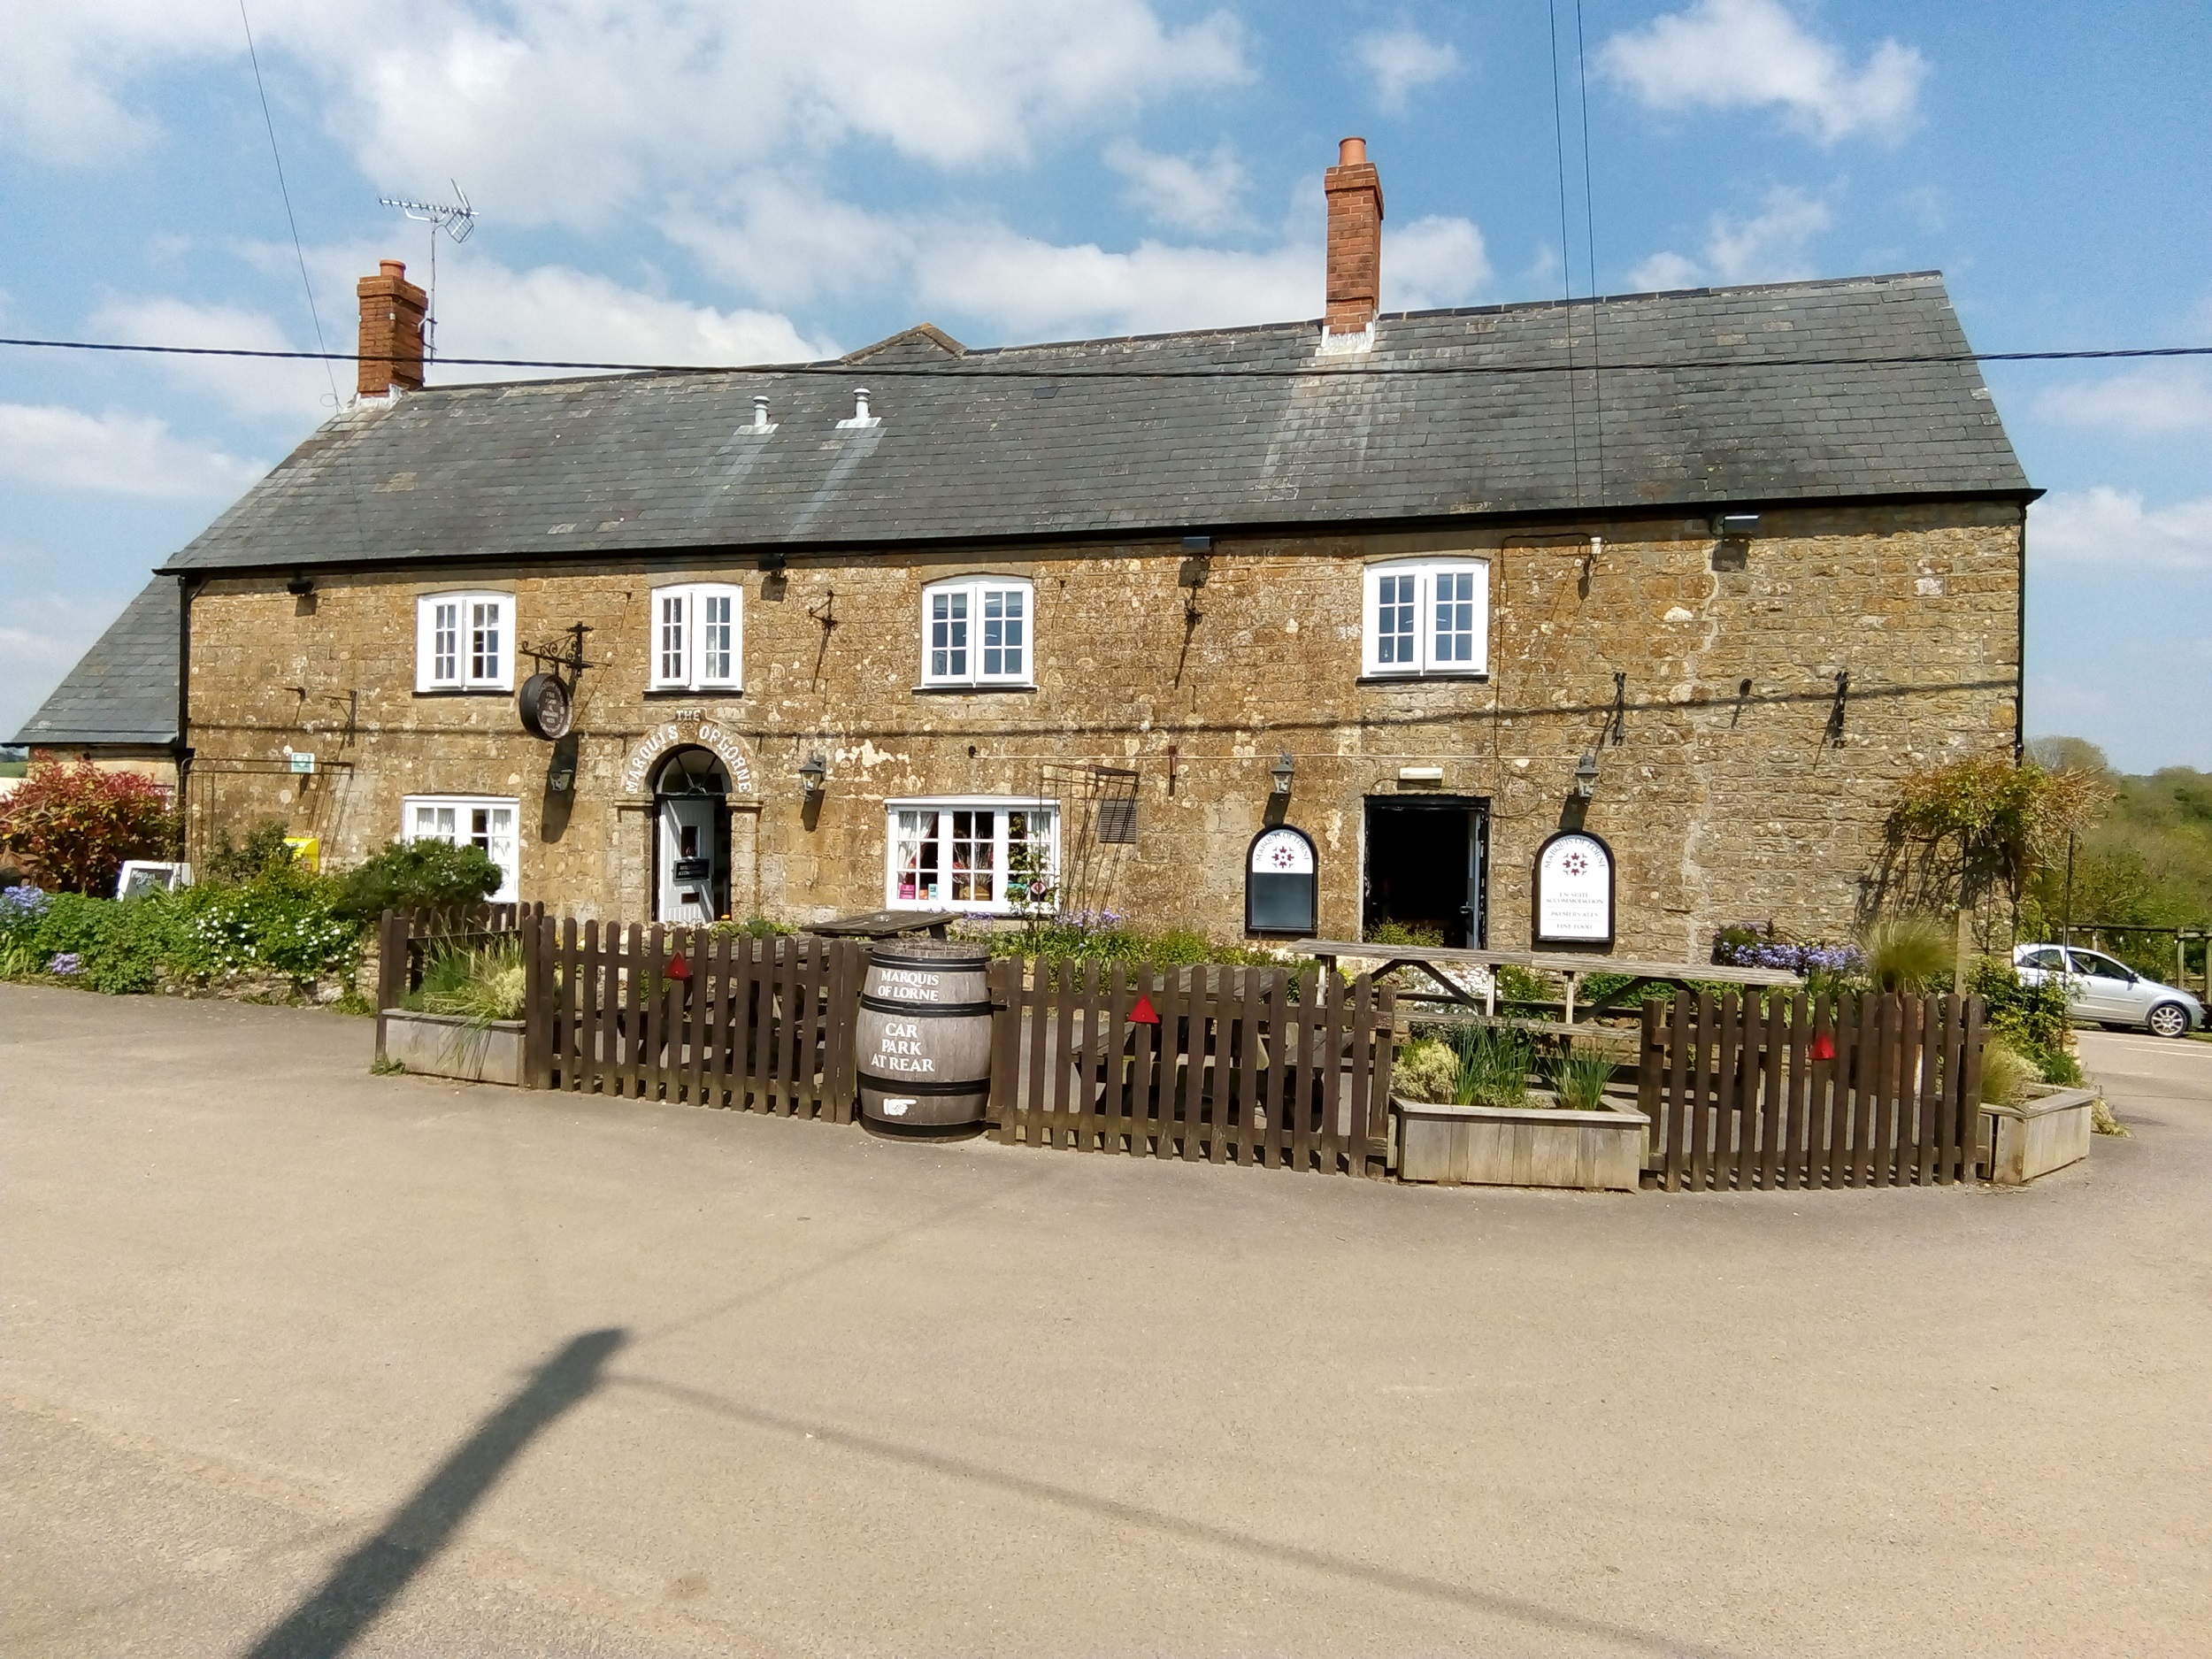 Rural stone pub with tiled roof sunny day